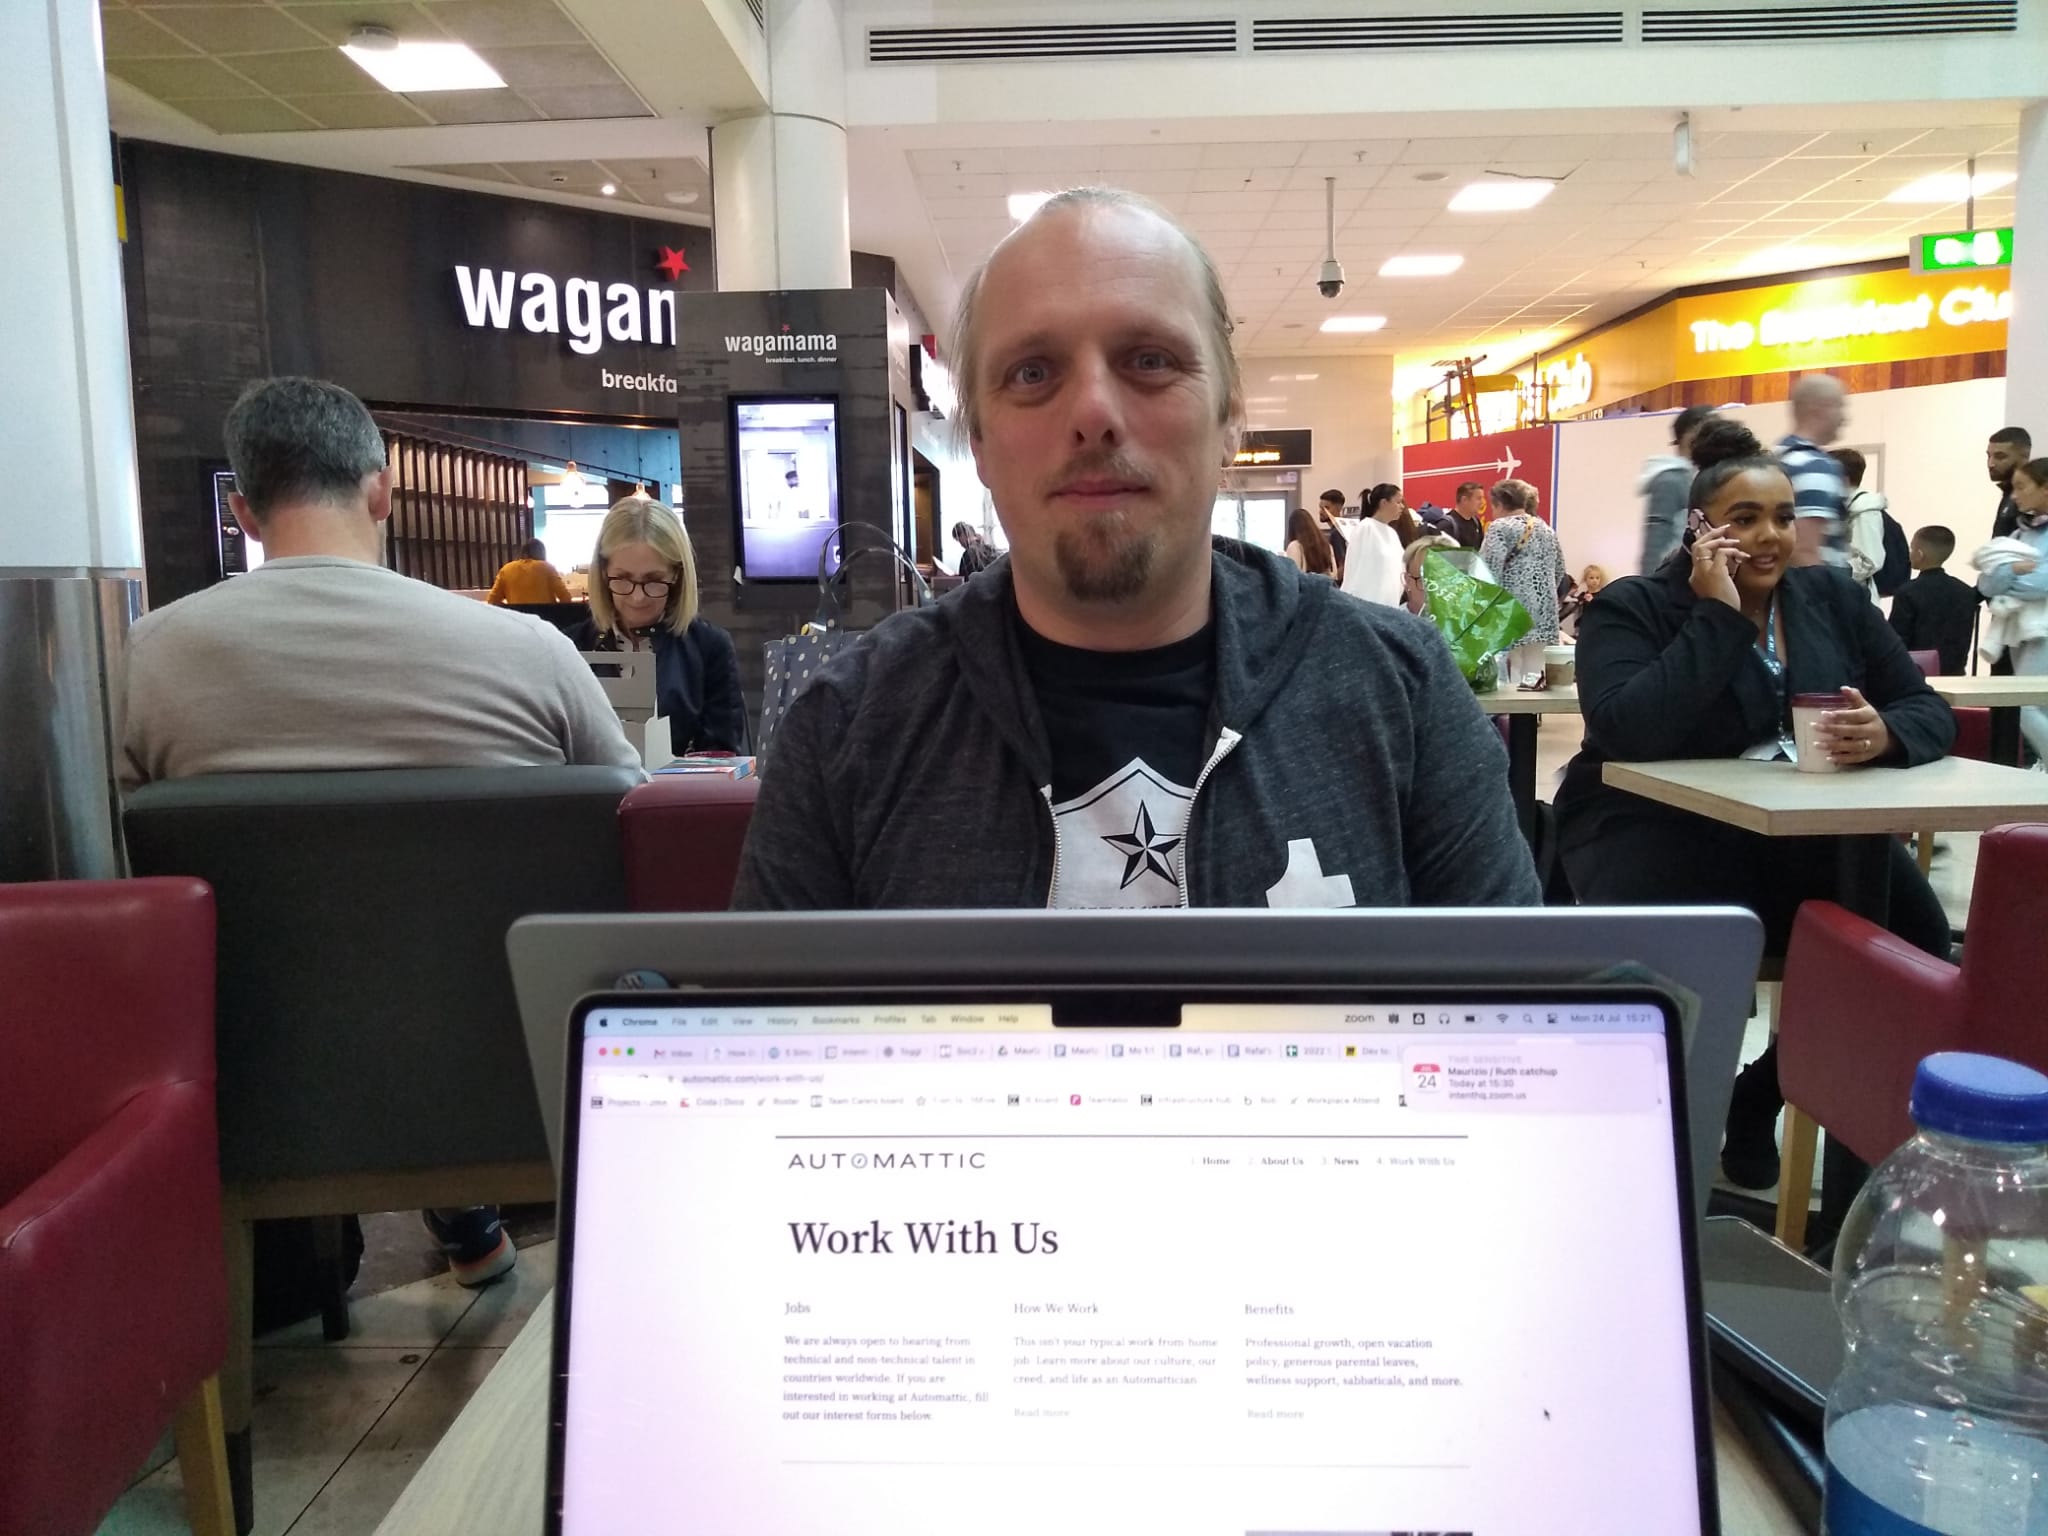 A laptop screen shows Automattic's "Work With Us" web page. Beyond it, in an airport departure lounge (with diners of Wagamama and The Breakfast Club in the background), Dan sits at another laptop, wearing a black "Accessibility Woke Platoon" t-shirt and grey Tumblr hoodie.